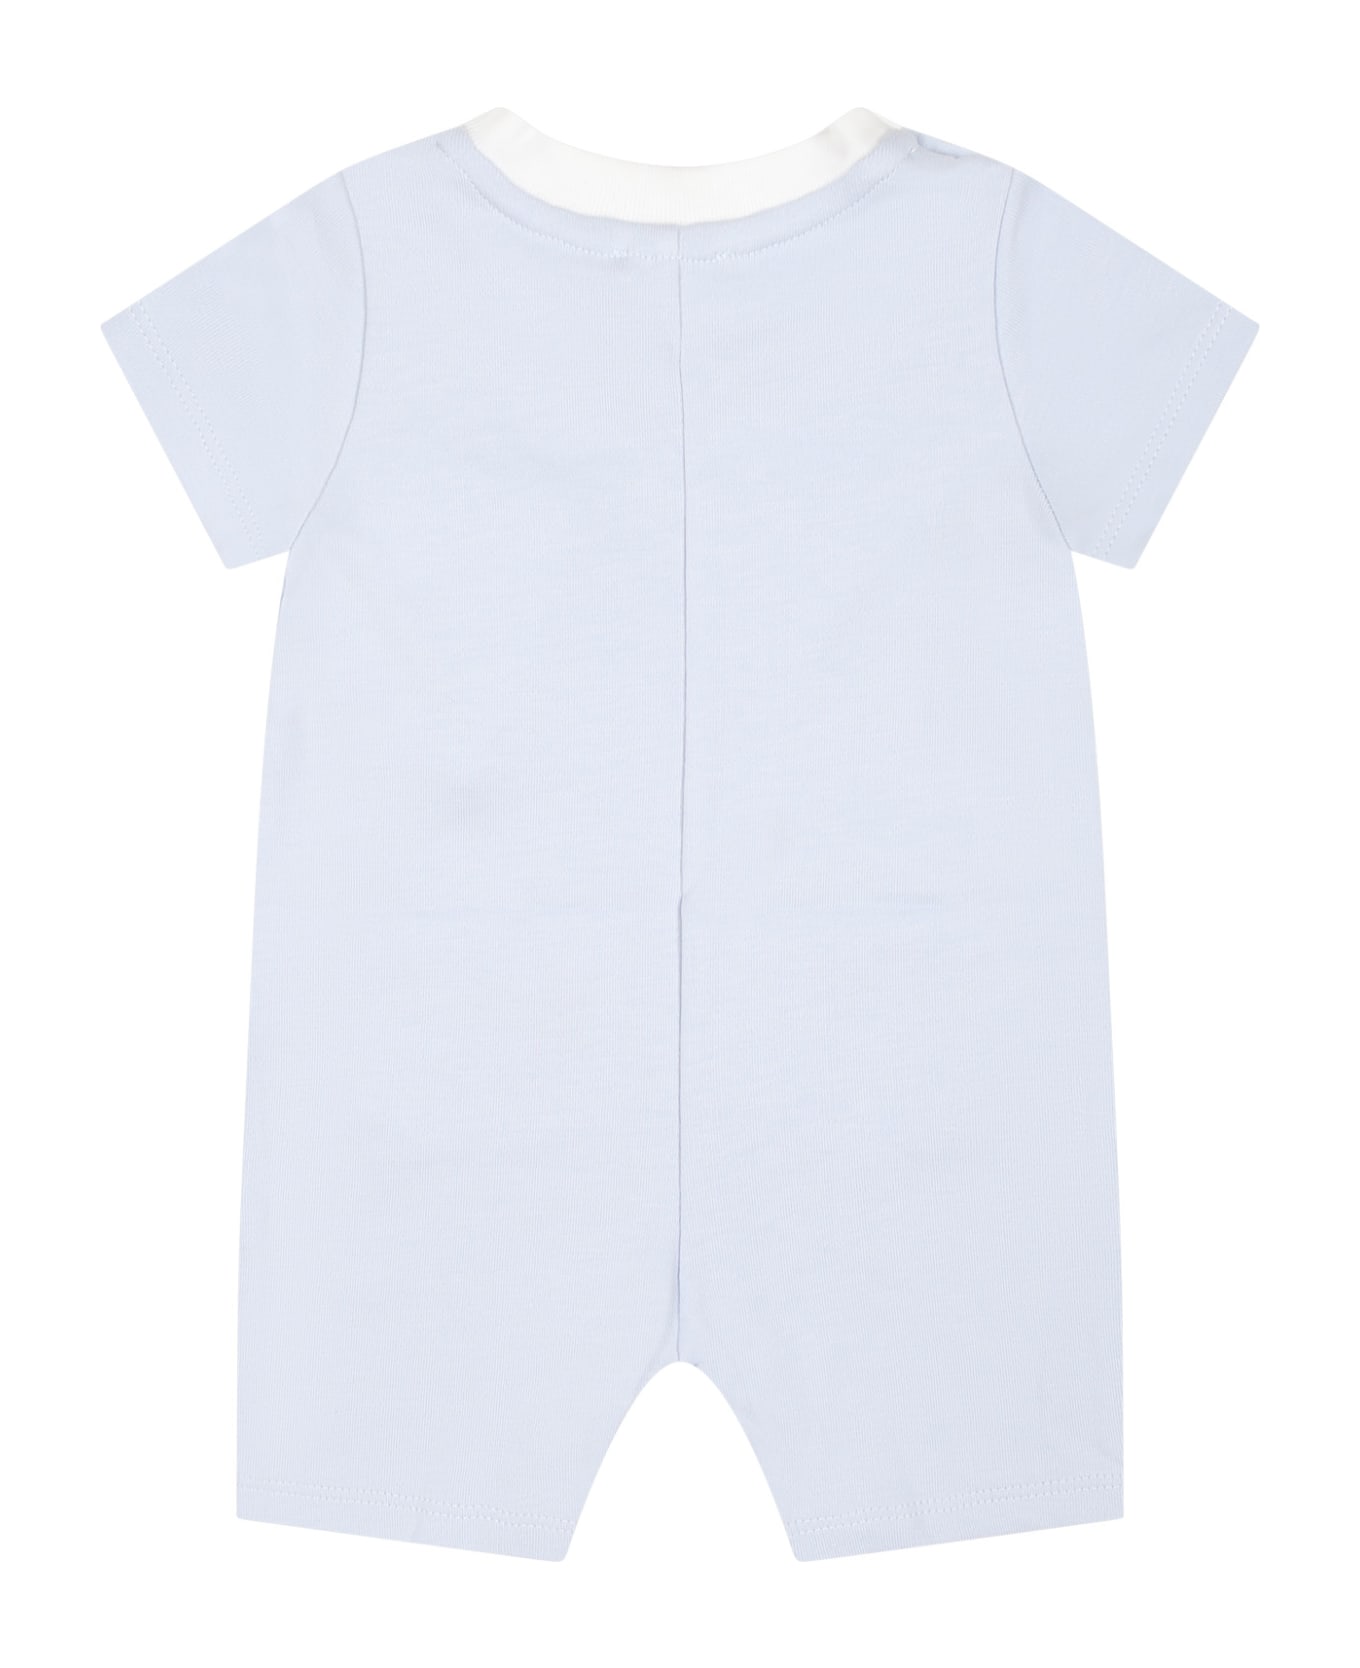 Givenchy Light Blue Romper For Baby Boy With Logo - Light Blue